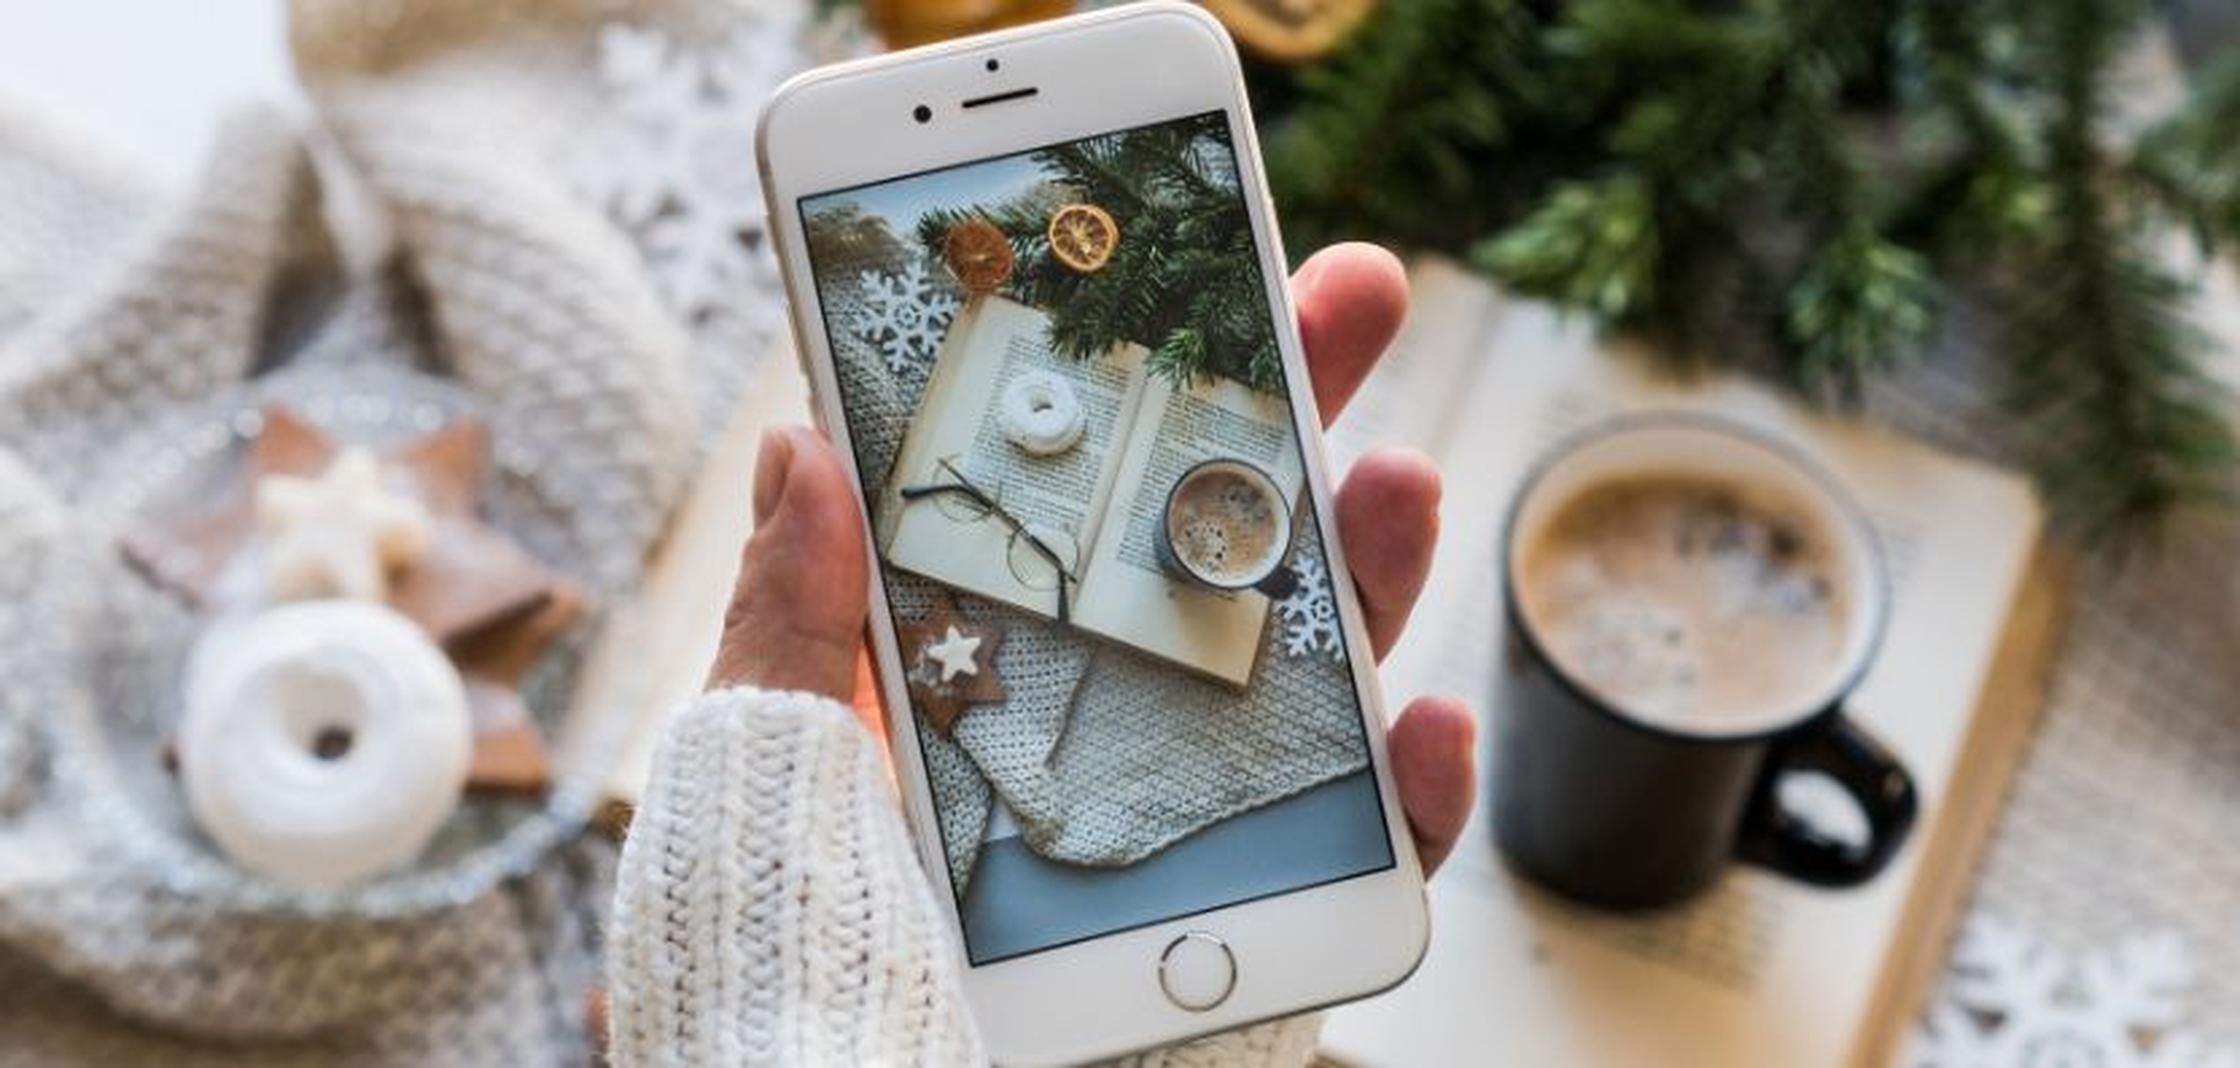 Smartphone as a Christmas gift for mum